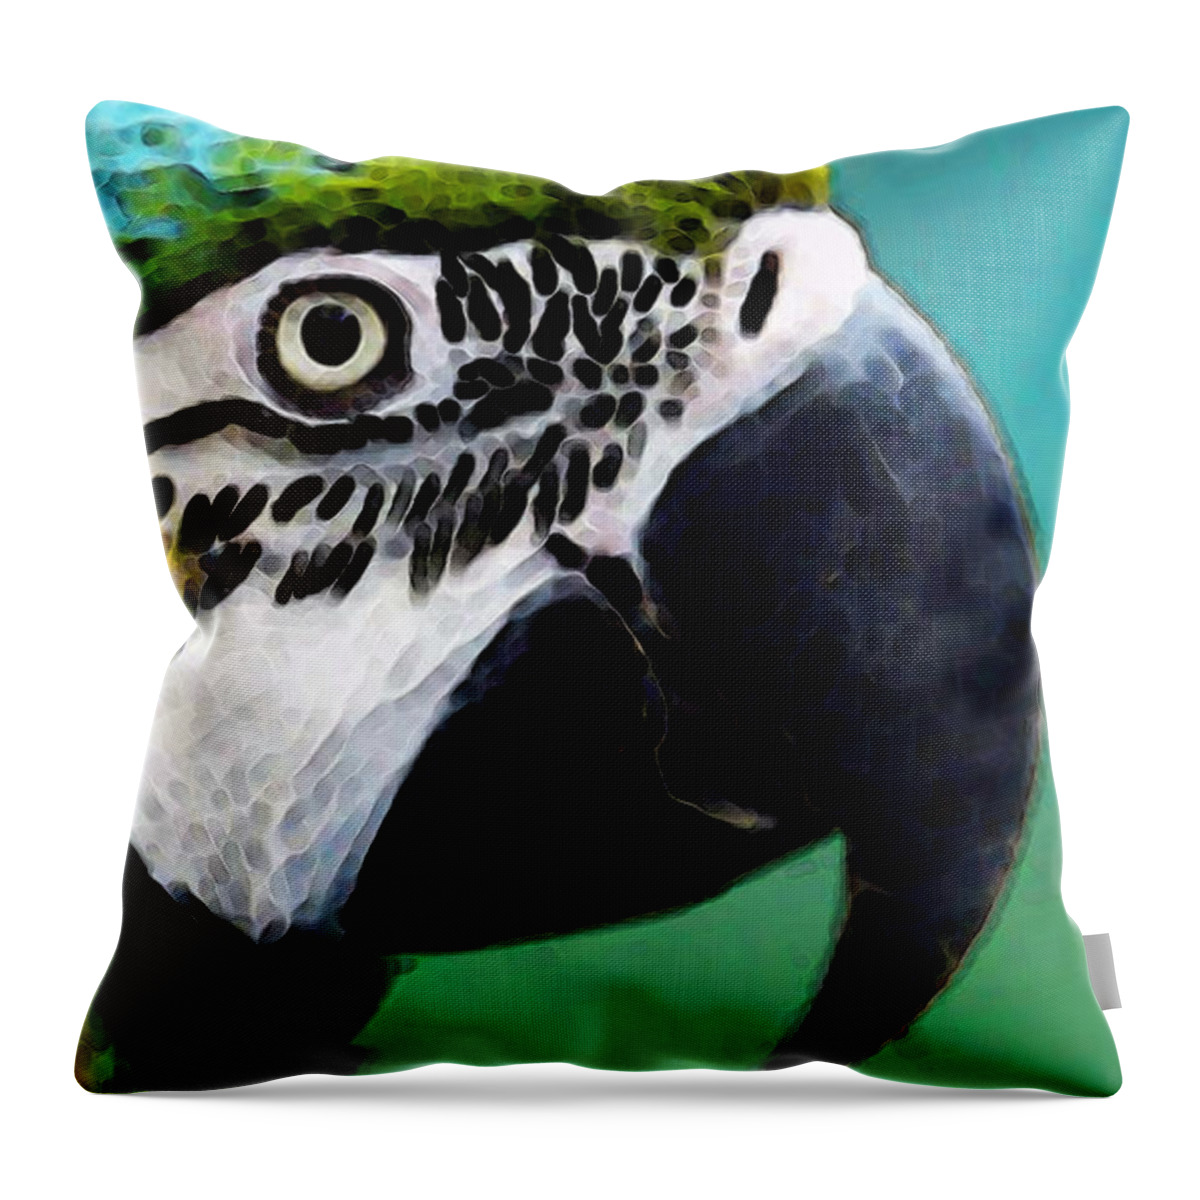 Macaw Throw Pillow featuring the painting Tropical Bird - Colorful Macaw by Sharon Cummings